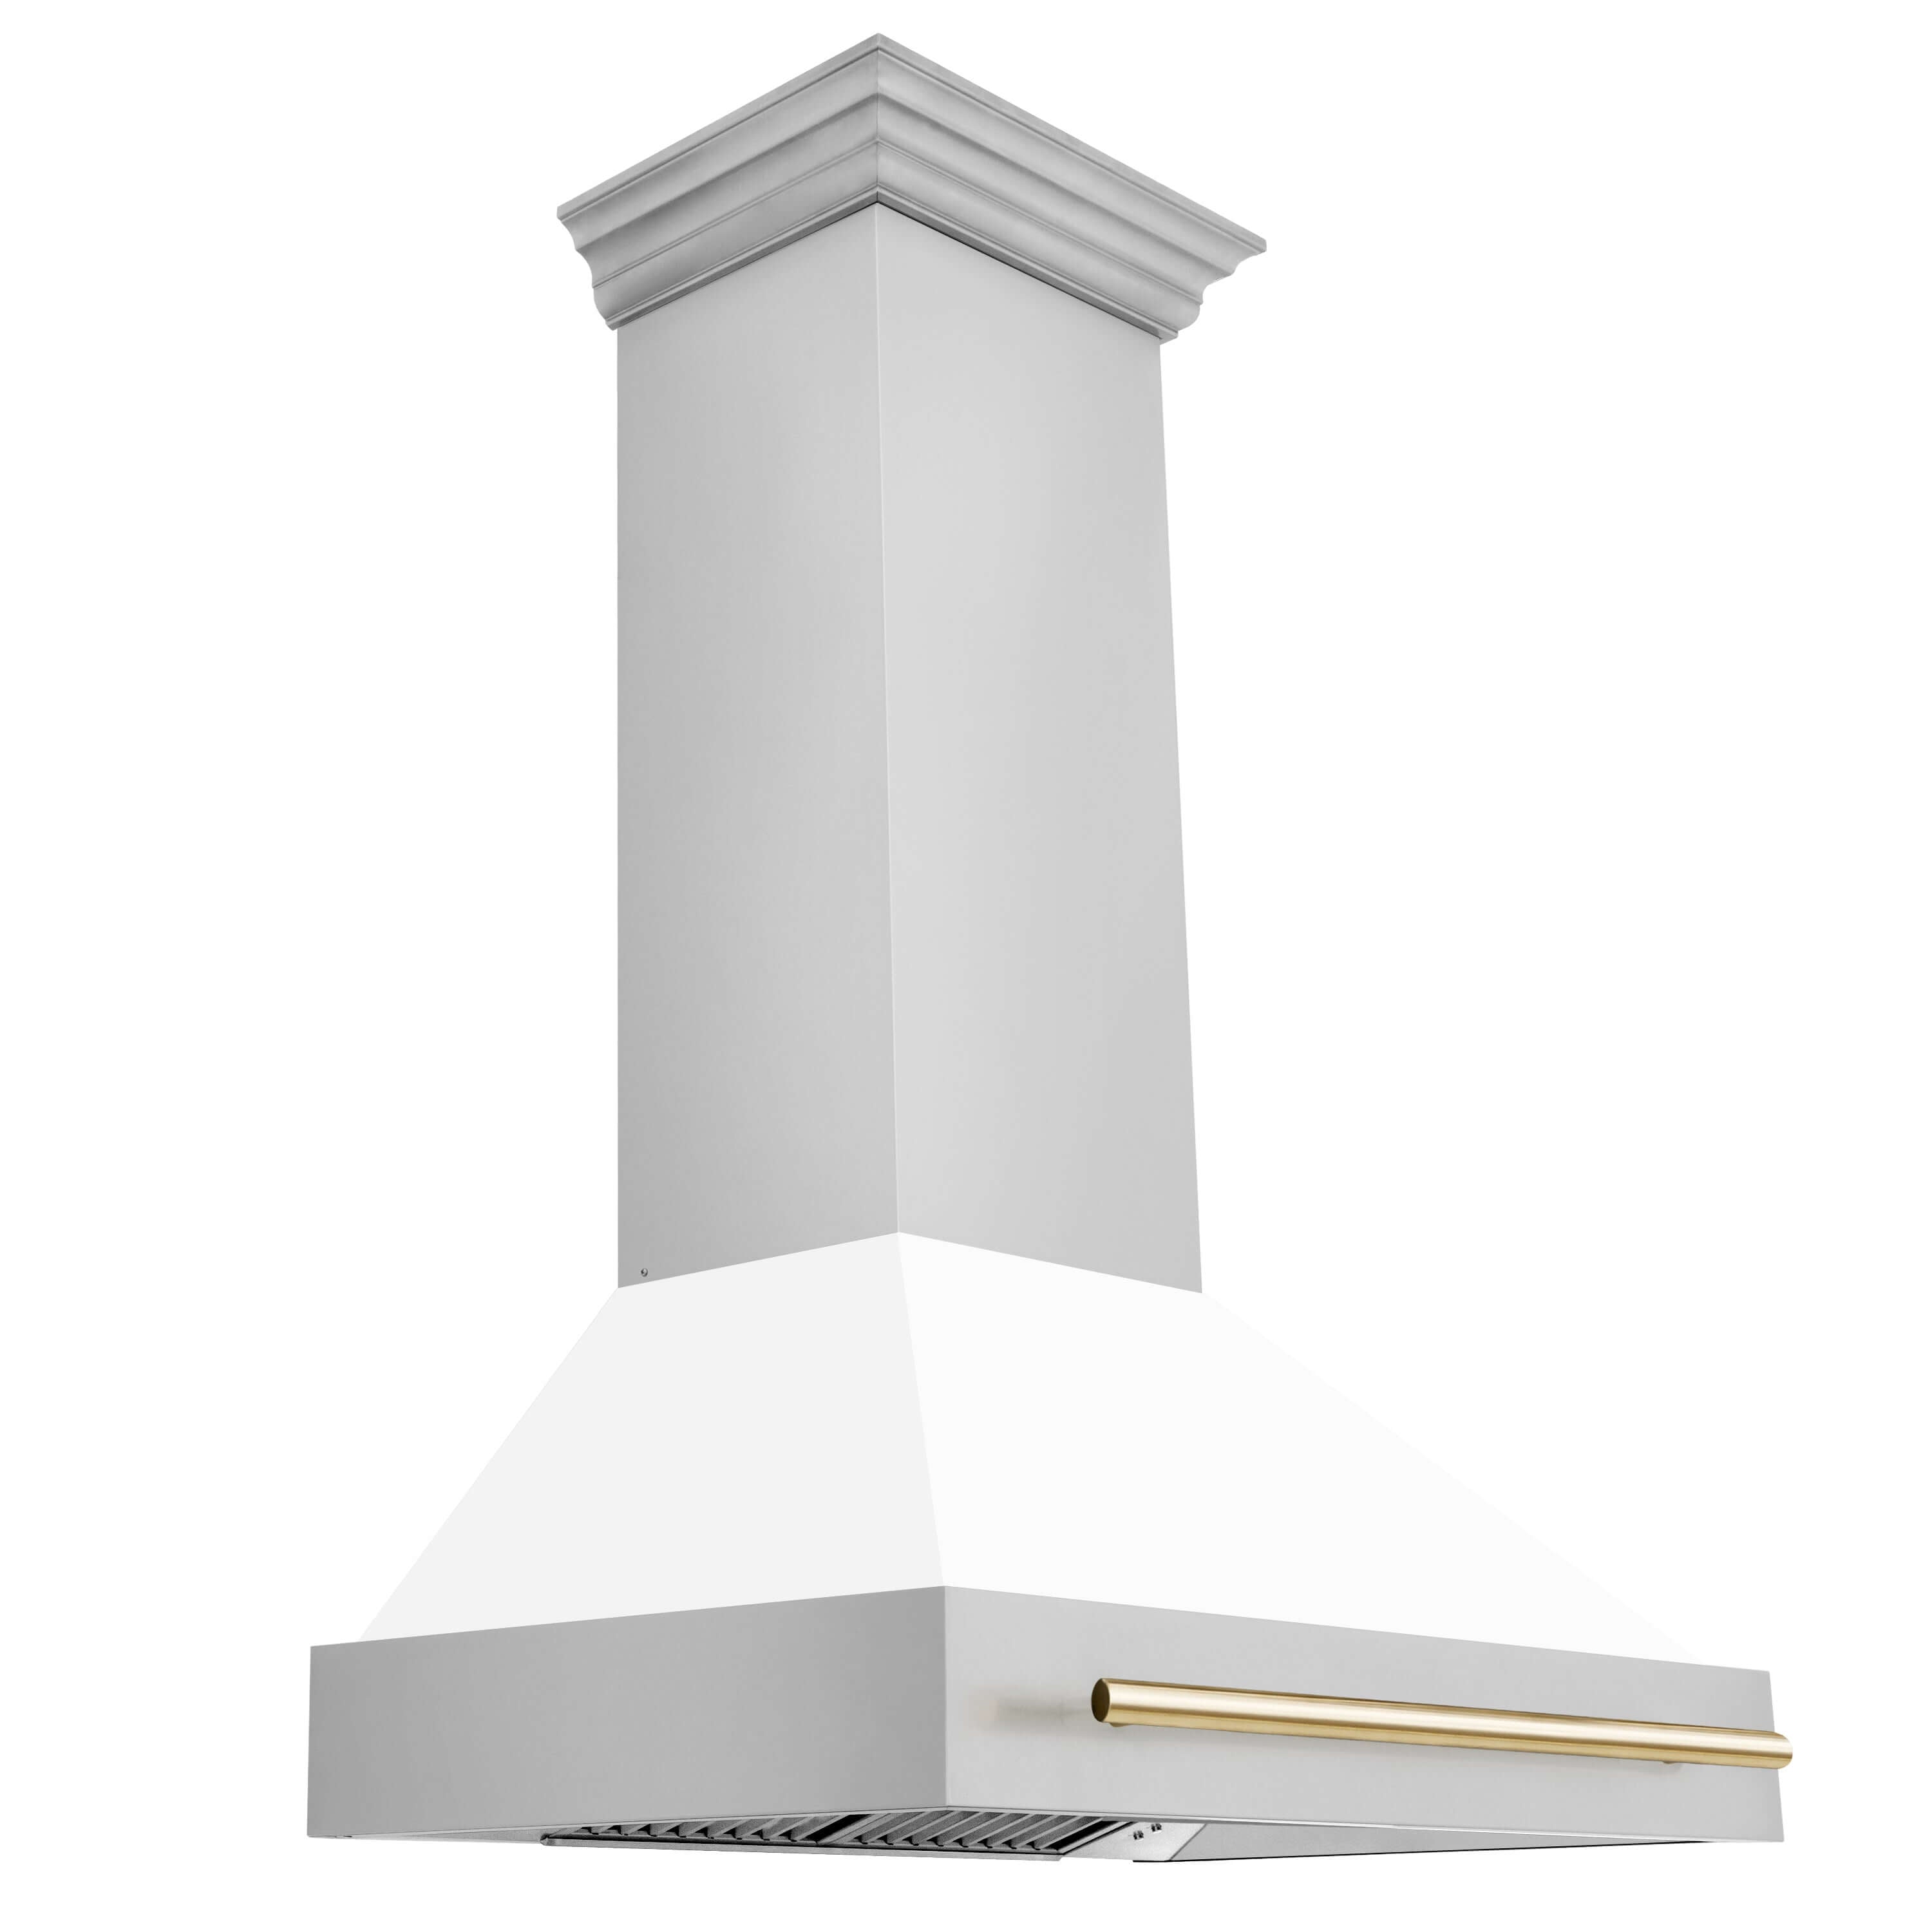 36" ZLINE Autograph Edition Stainless Steel Range Hood with White Matte Shell and Gold Handle (8654STZ-WM36-G)